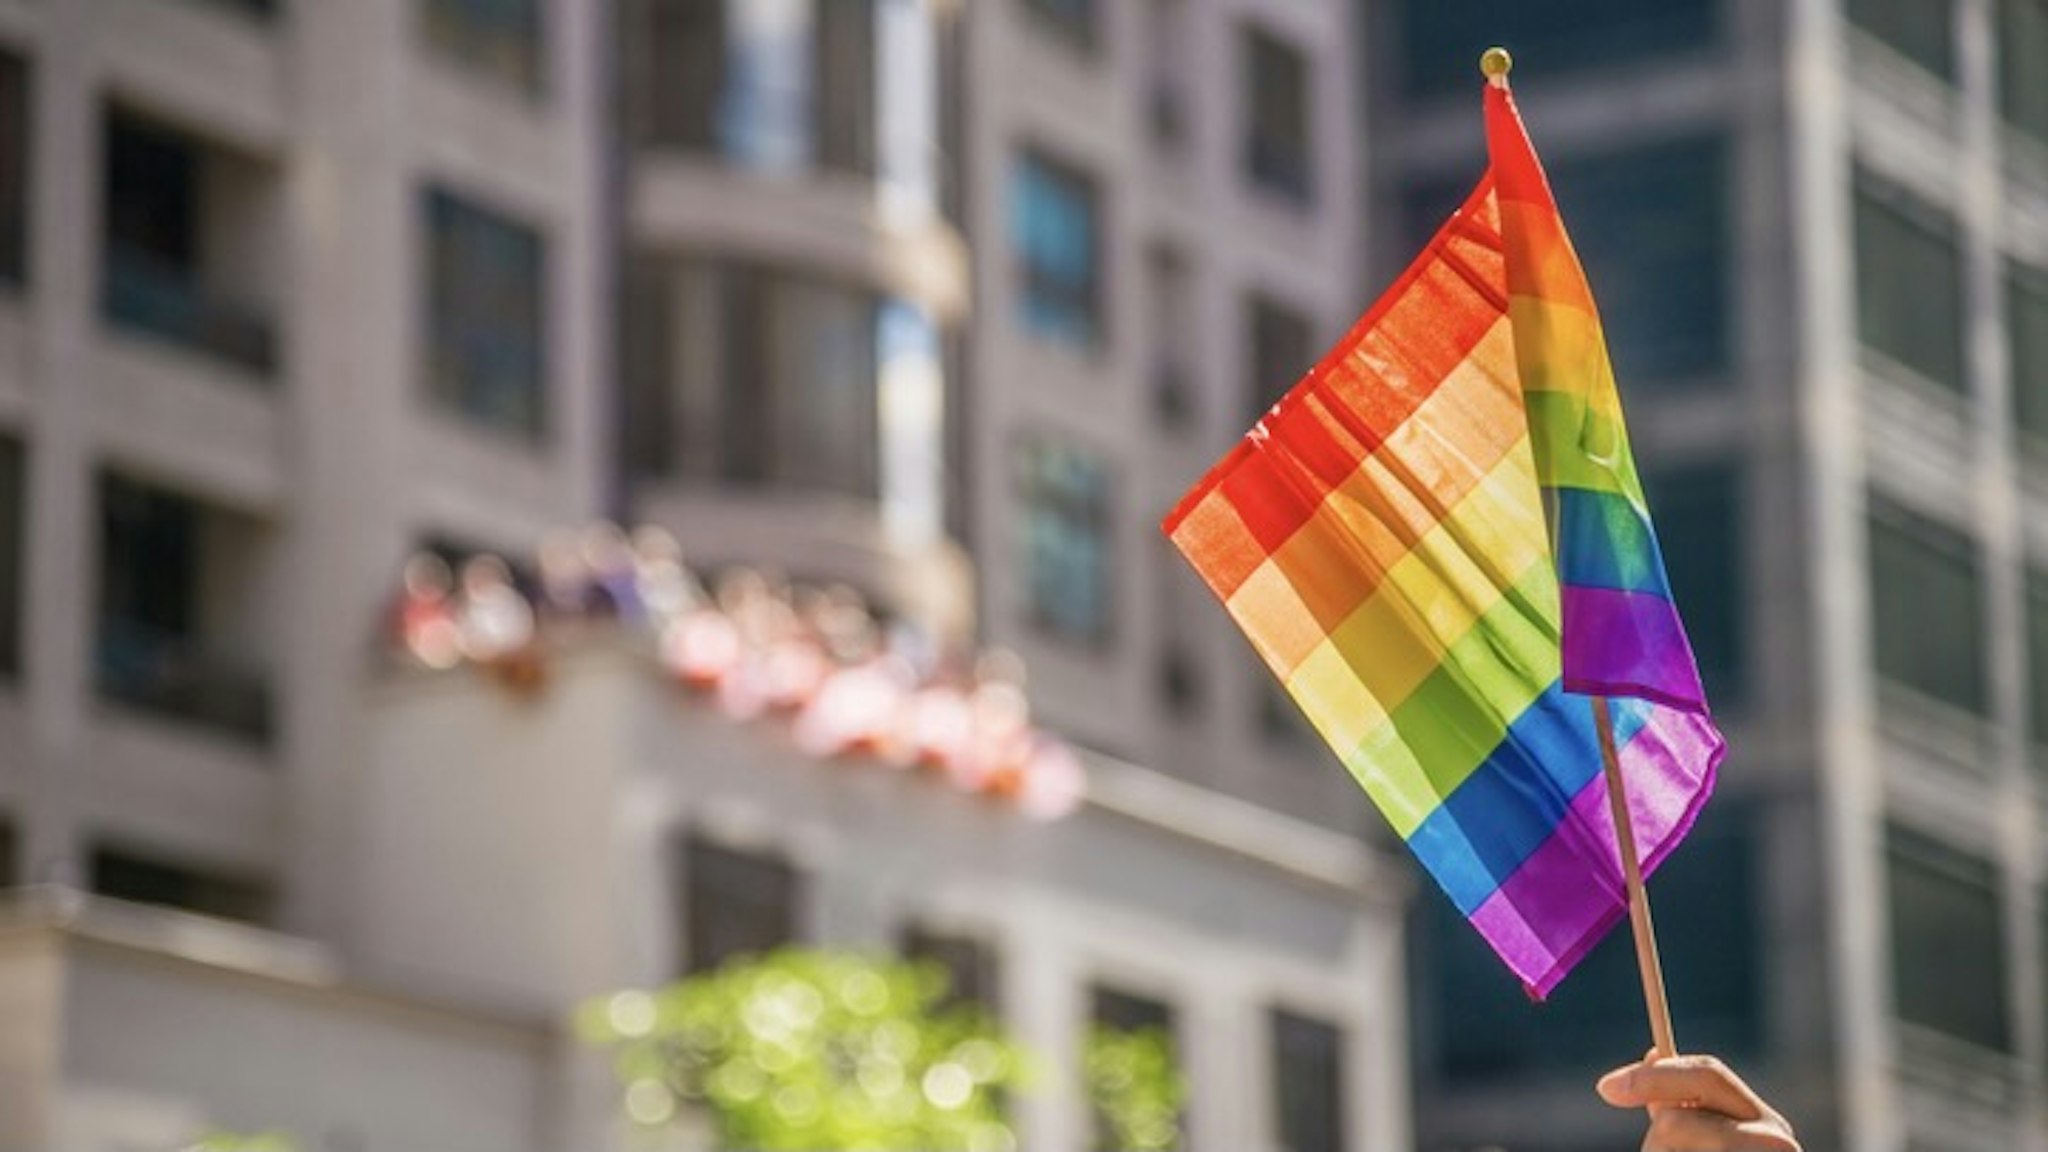 Cropped Hand Holding Rainbow Flag In City - stock photo Marc Bruxelle / EyeEm via Getty Images